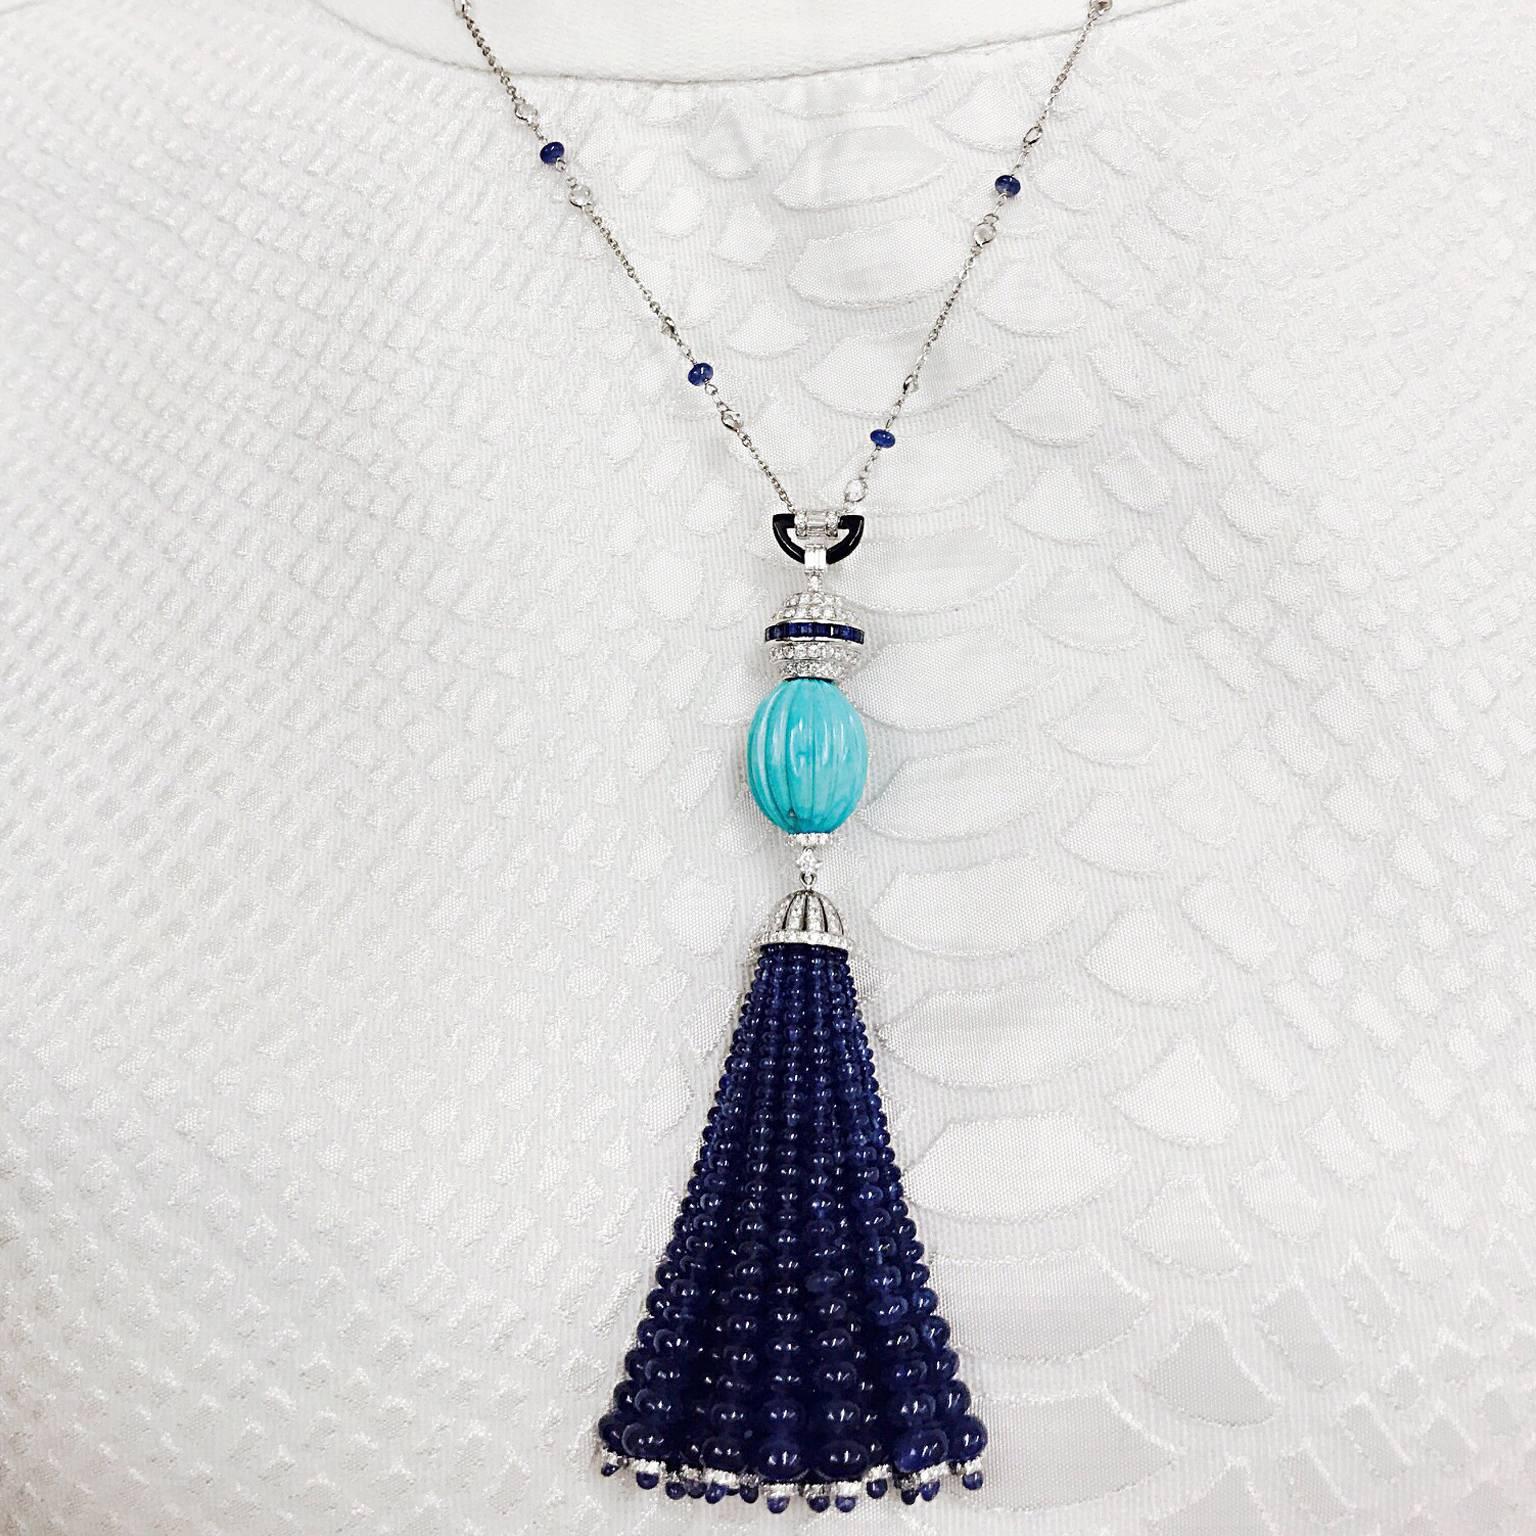 Carved Turquoise with Blue Sapphire Bead Tassel pendant at approx. 4'' in length is attached to a beautiful 18'' Diamond and Blue Sapphire White Gold Chain.

Blue Sapphire - Approx. 7.13cts
Blue Sapphire Beads - Approx. 133.85
Diamond - Approx.